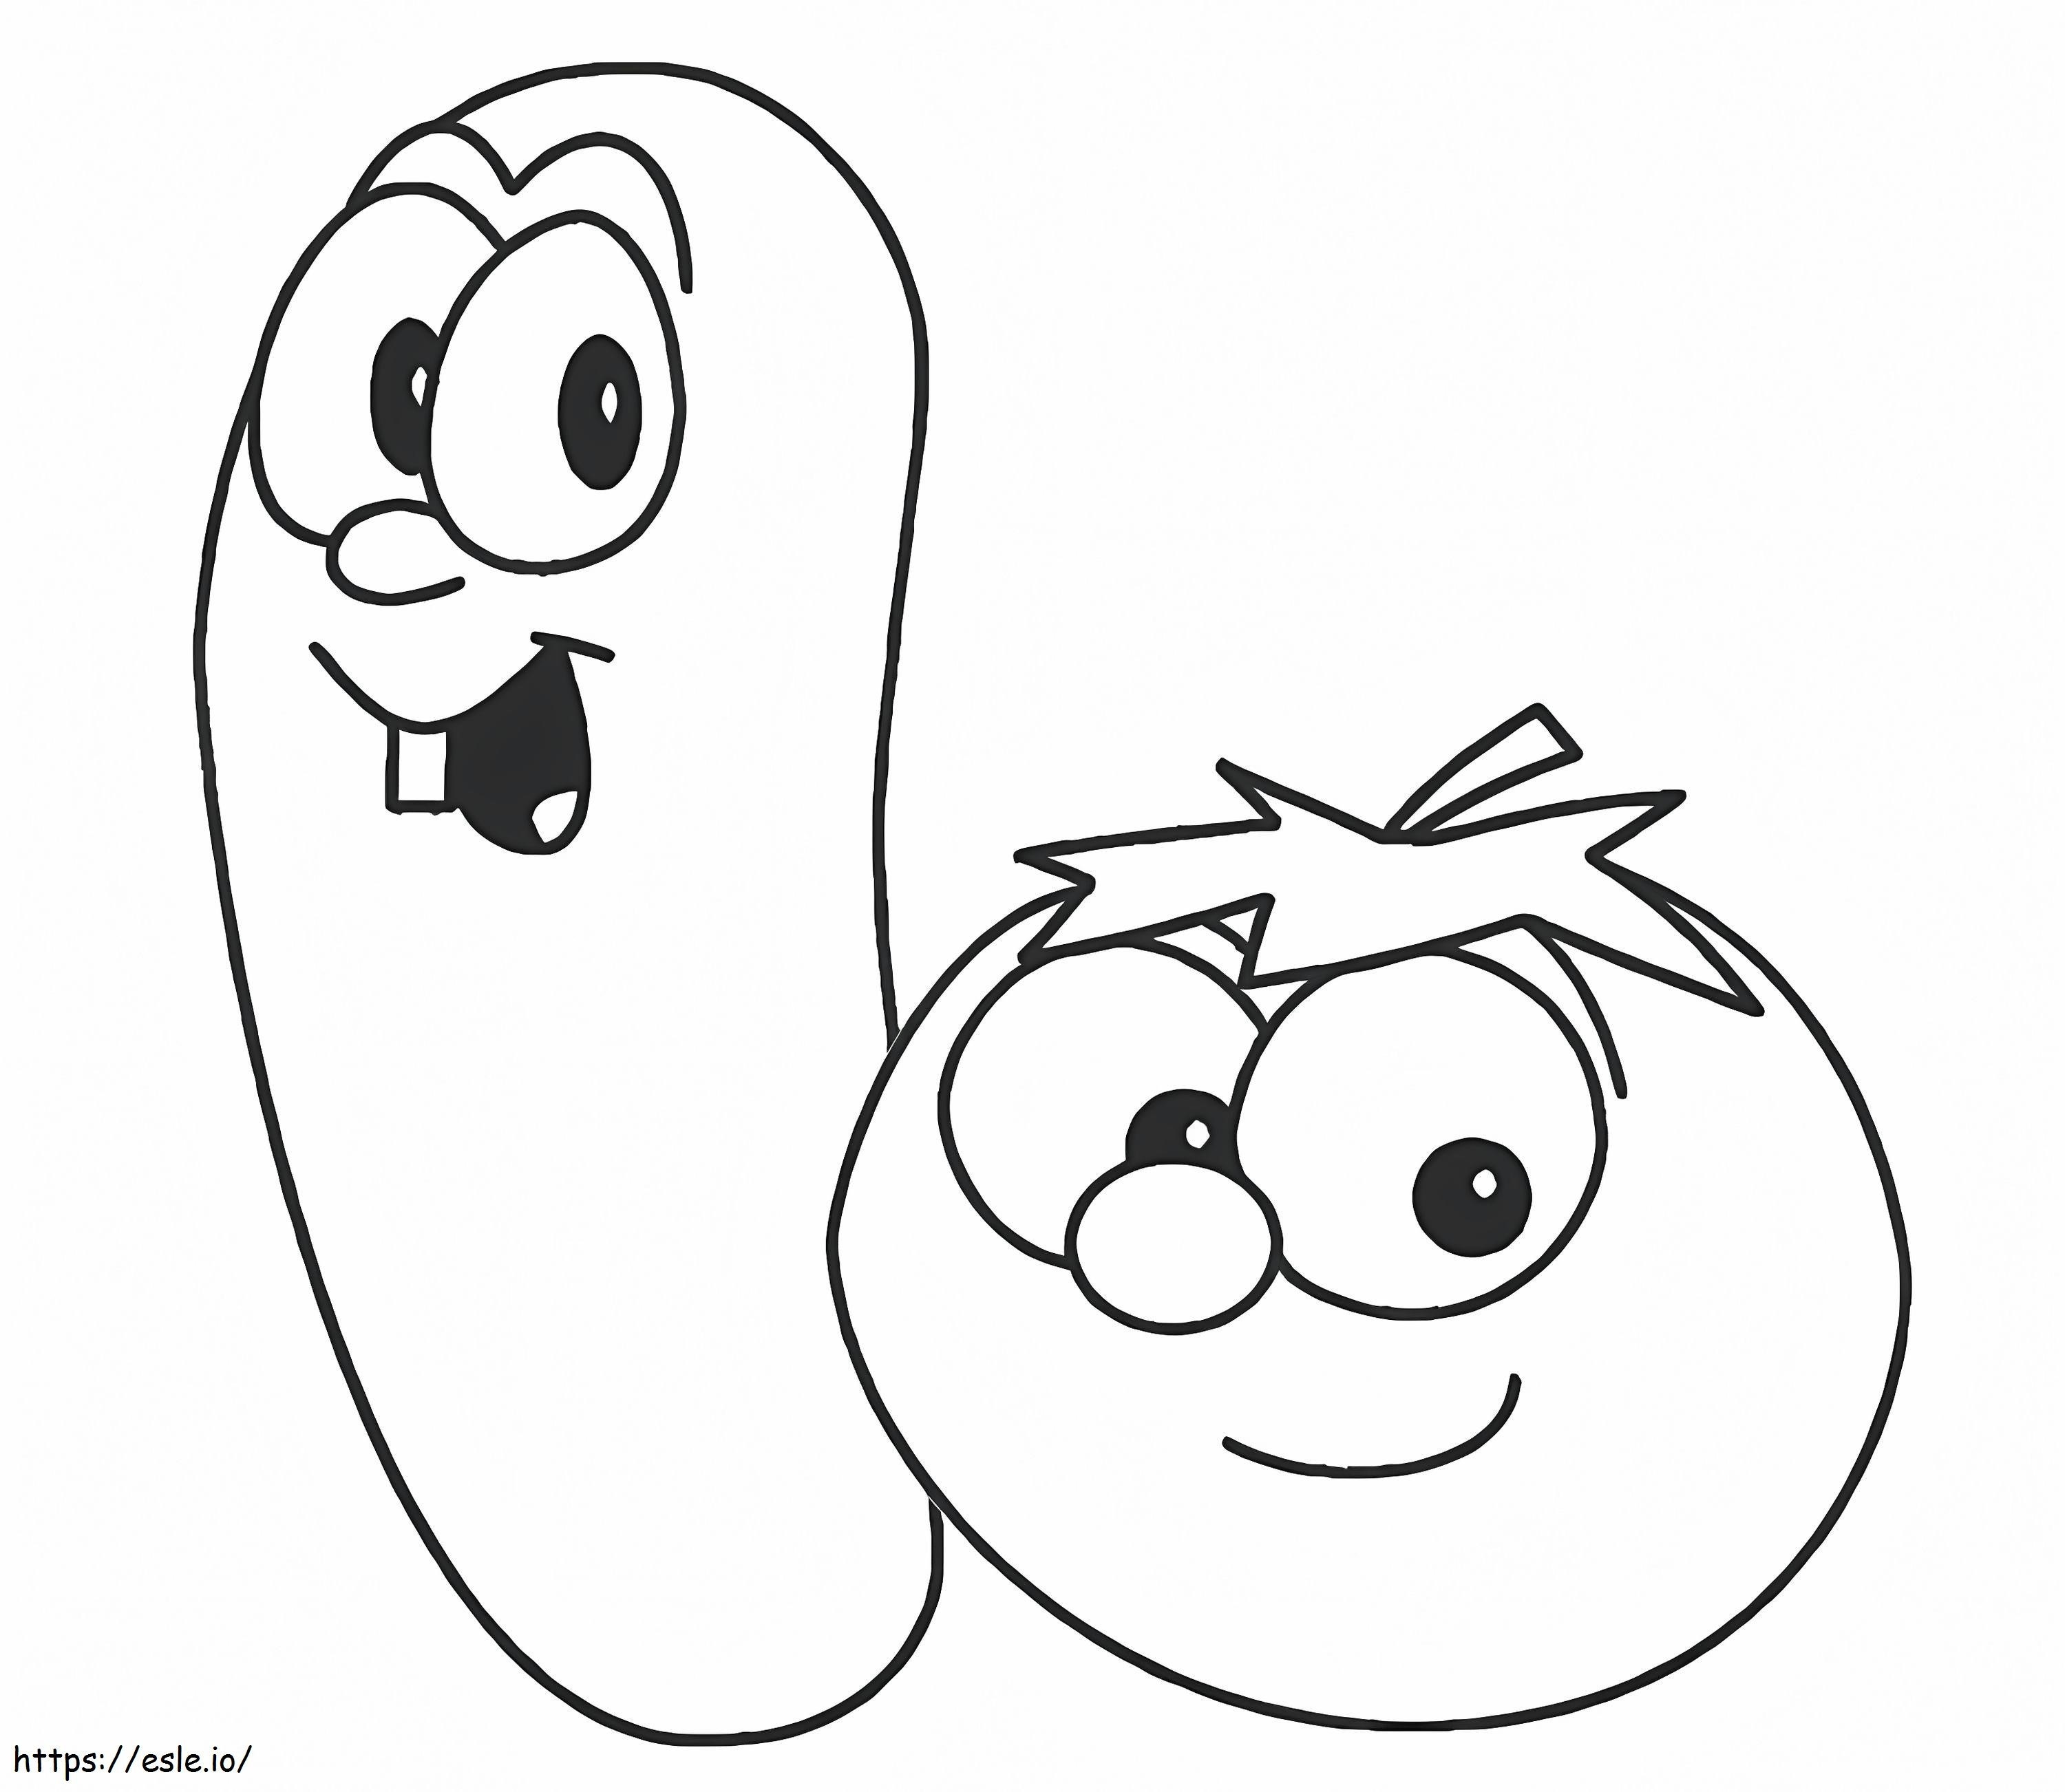 Cartoon Cucumber coloring page